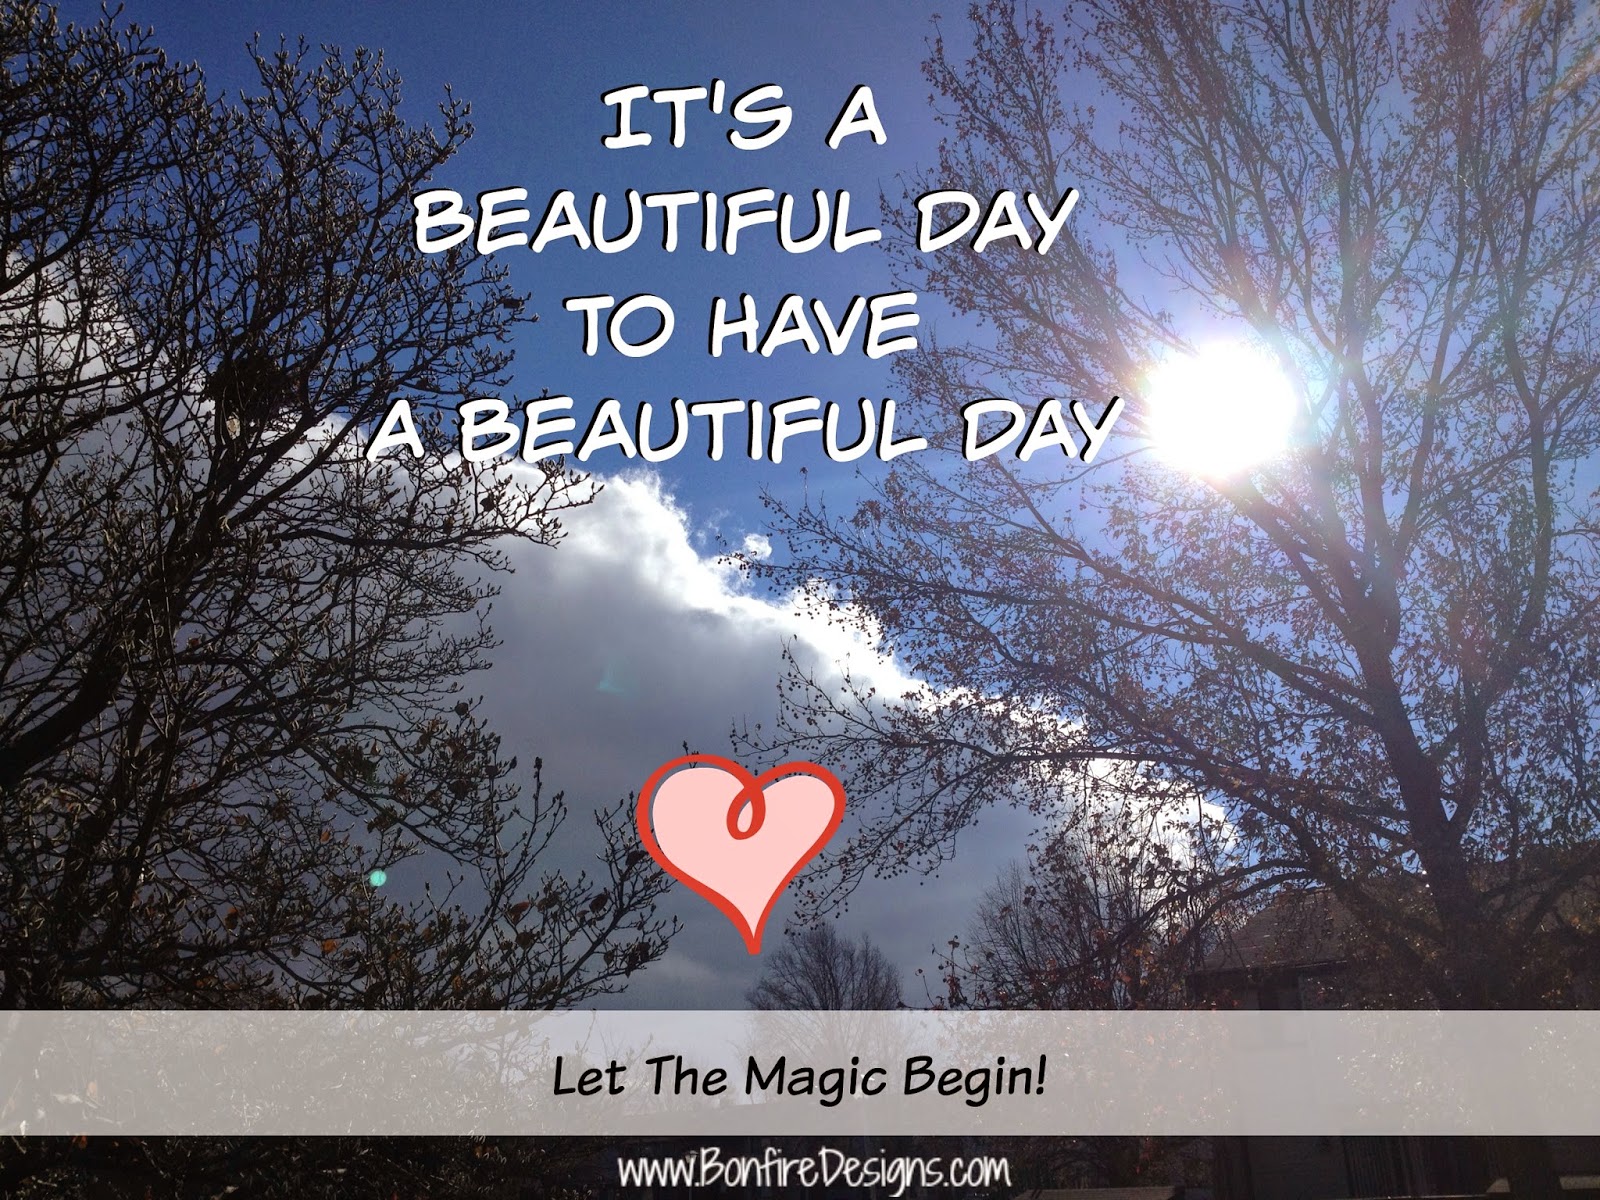 Today Is A Beautiful Day To Have A Beautiful Day